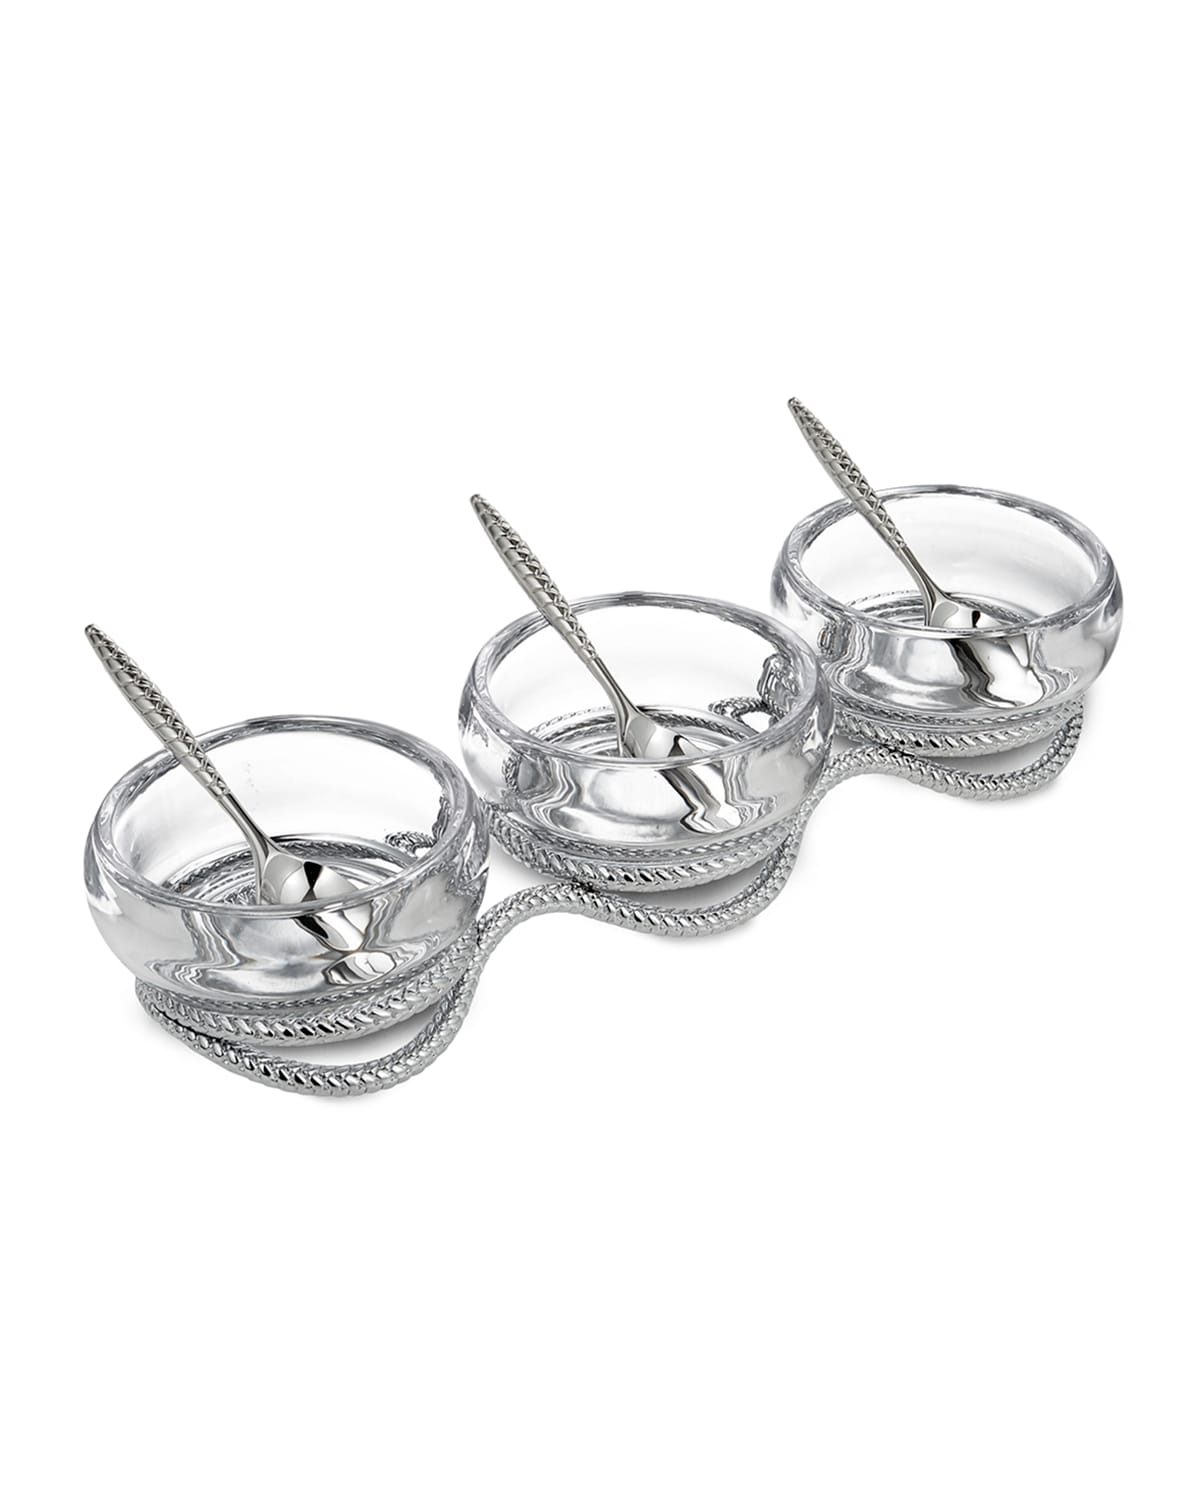 Nambe Braid Triple Condiment Set With Spoons In Burgundy